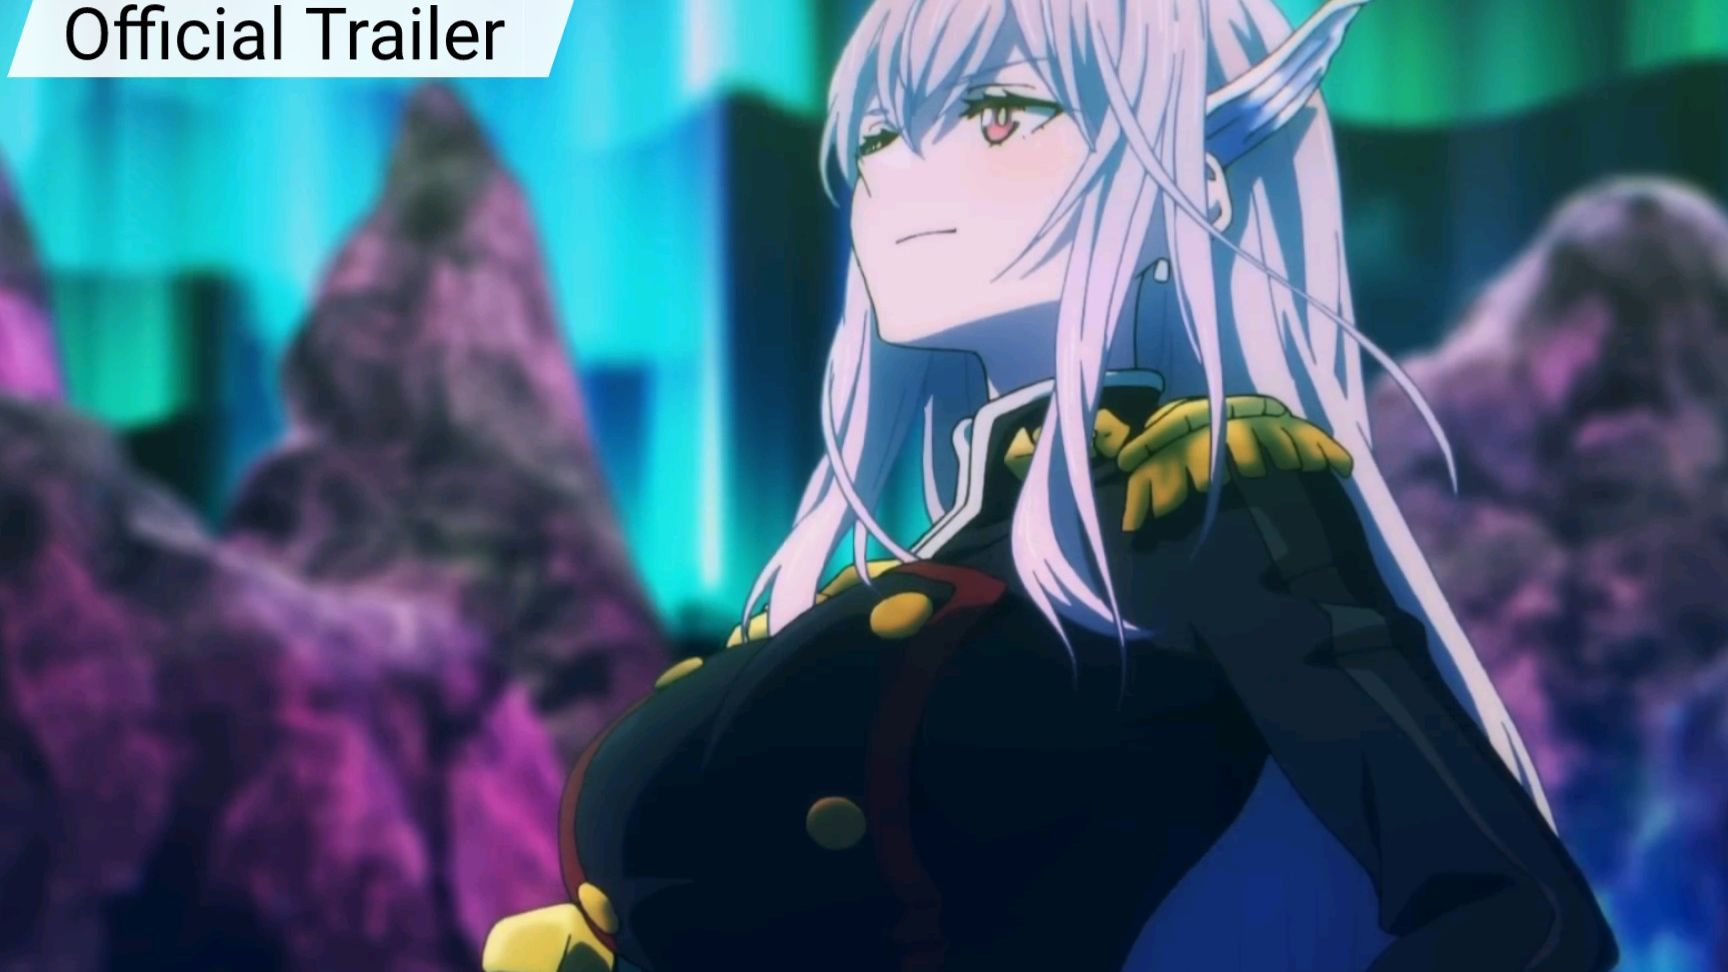 Strike the Blood Final, Trailer Oficial